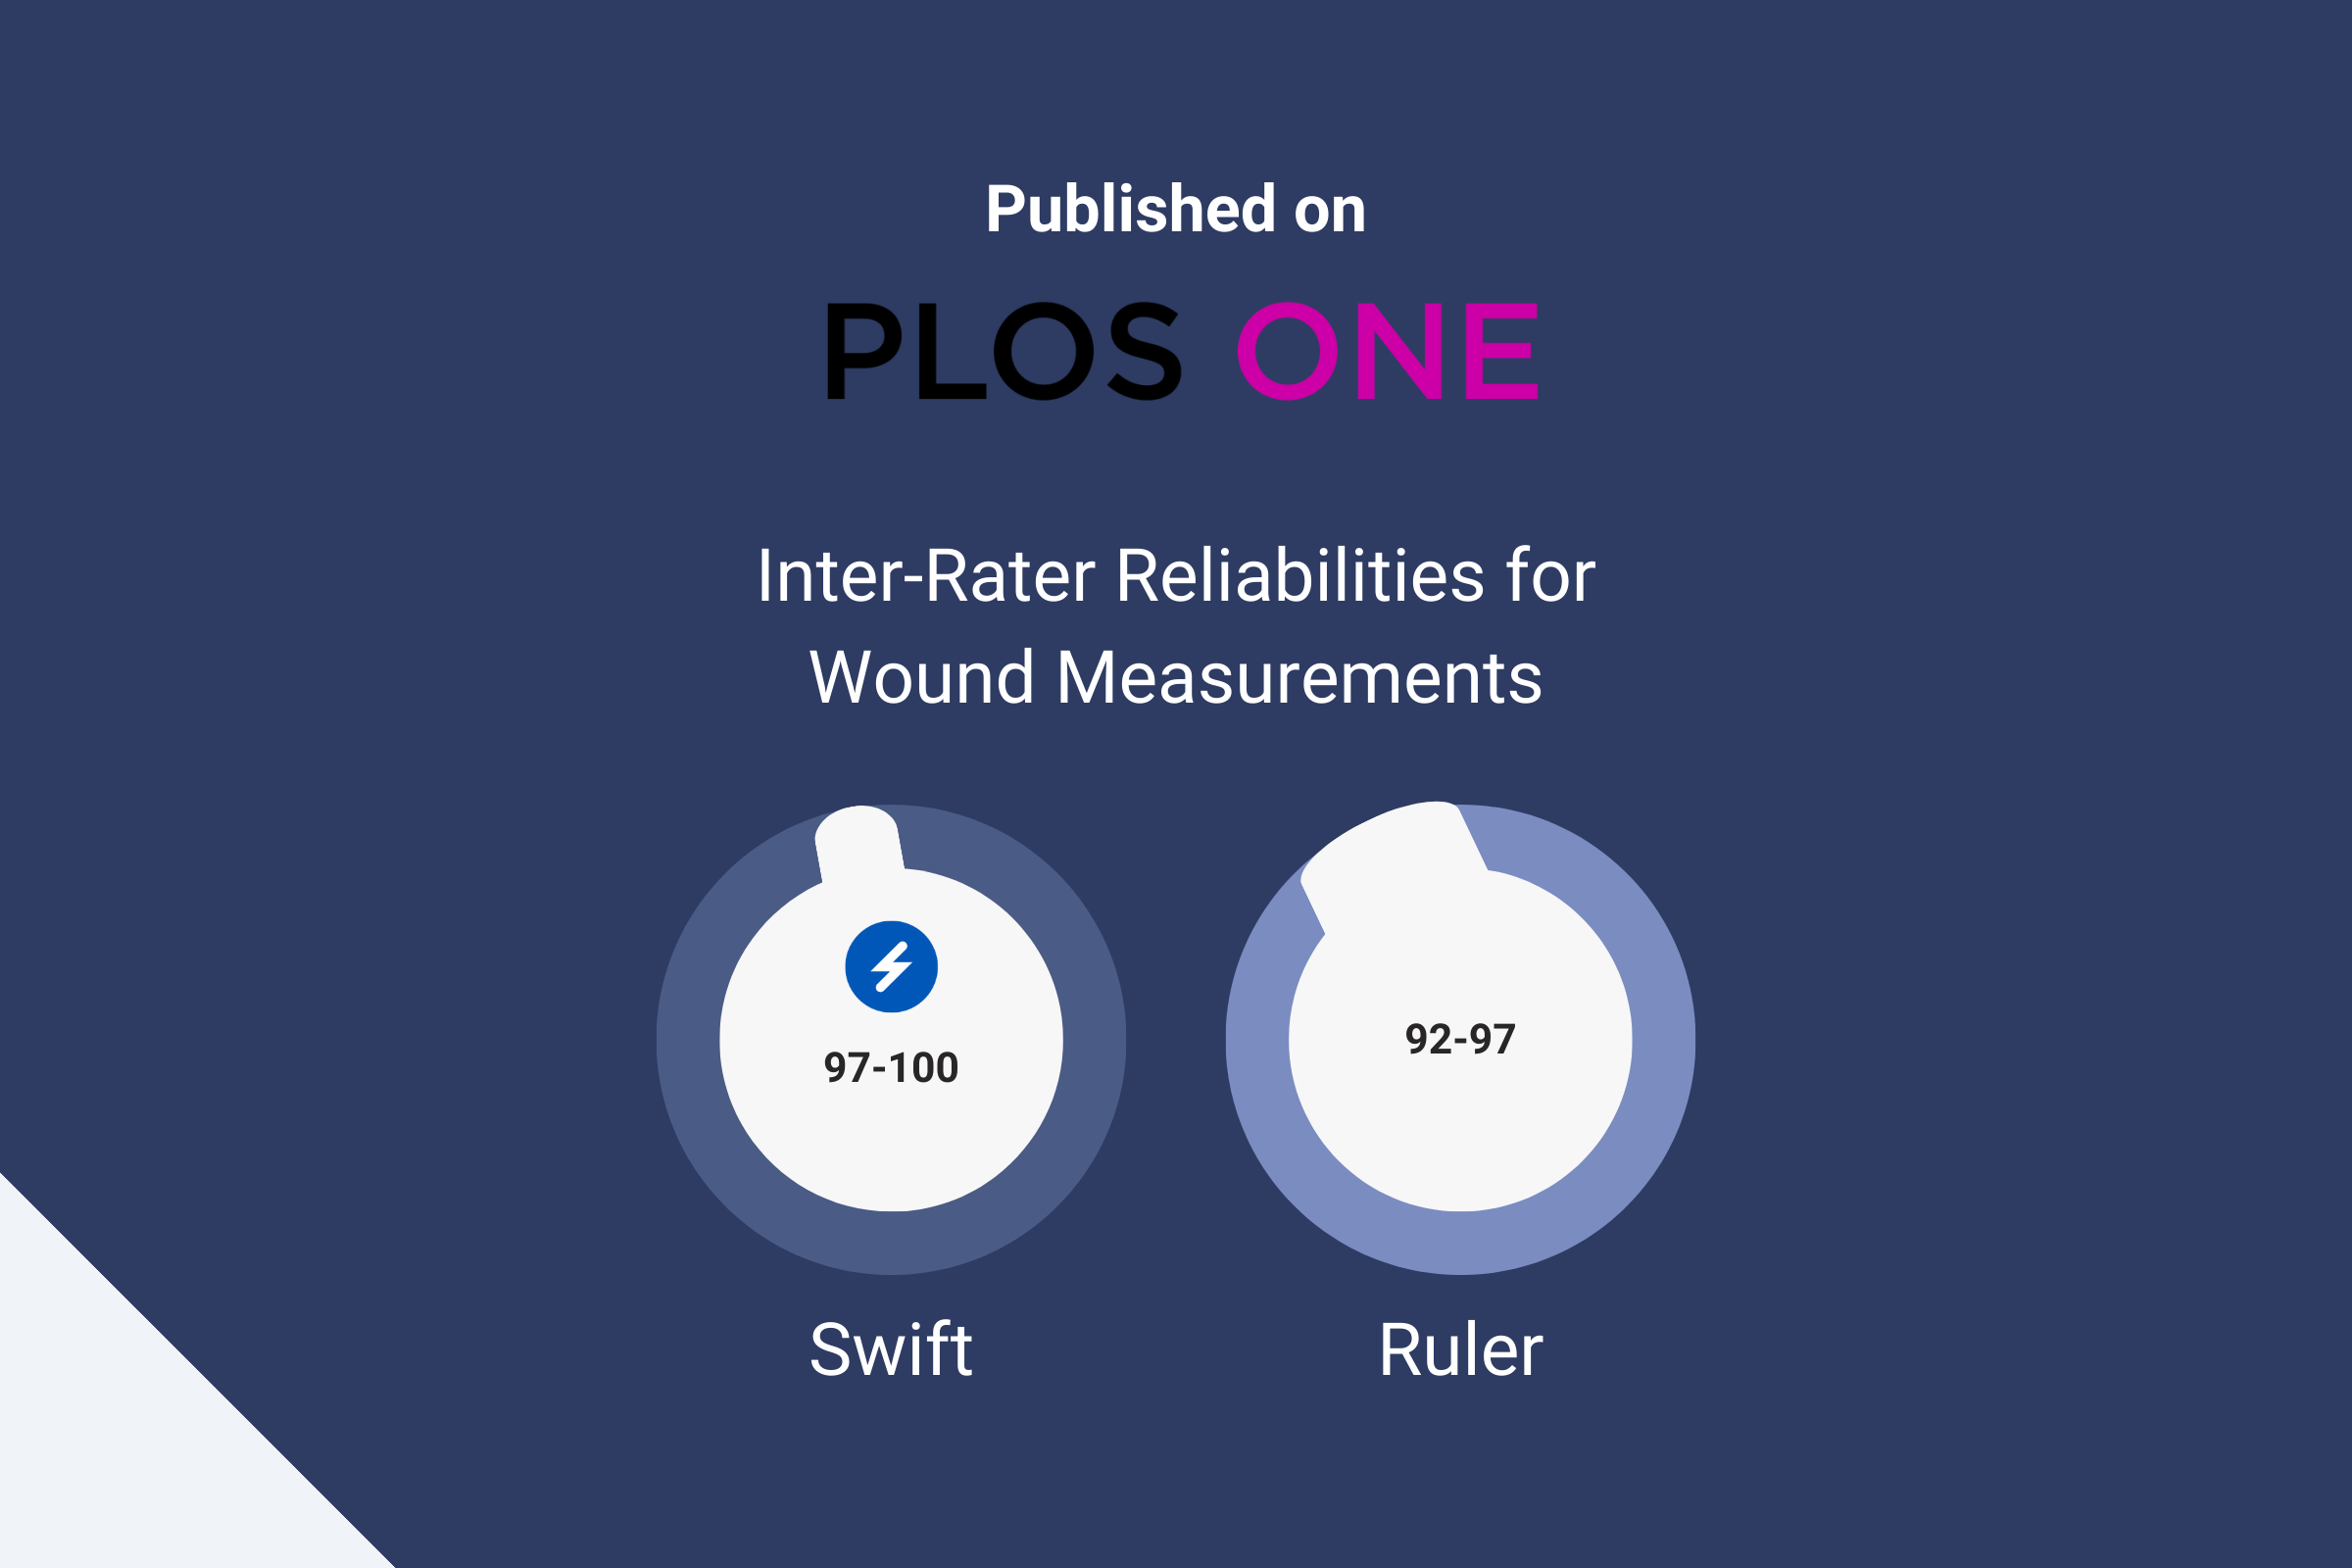 Inter-Rater Reliabilities for Wounnd Measurements